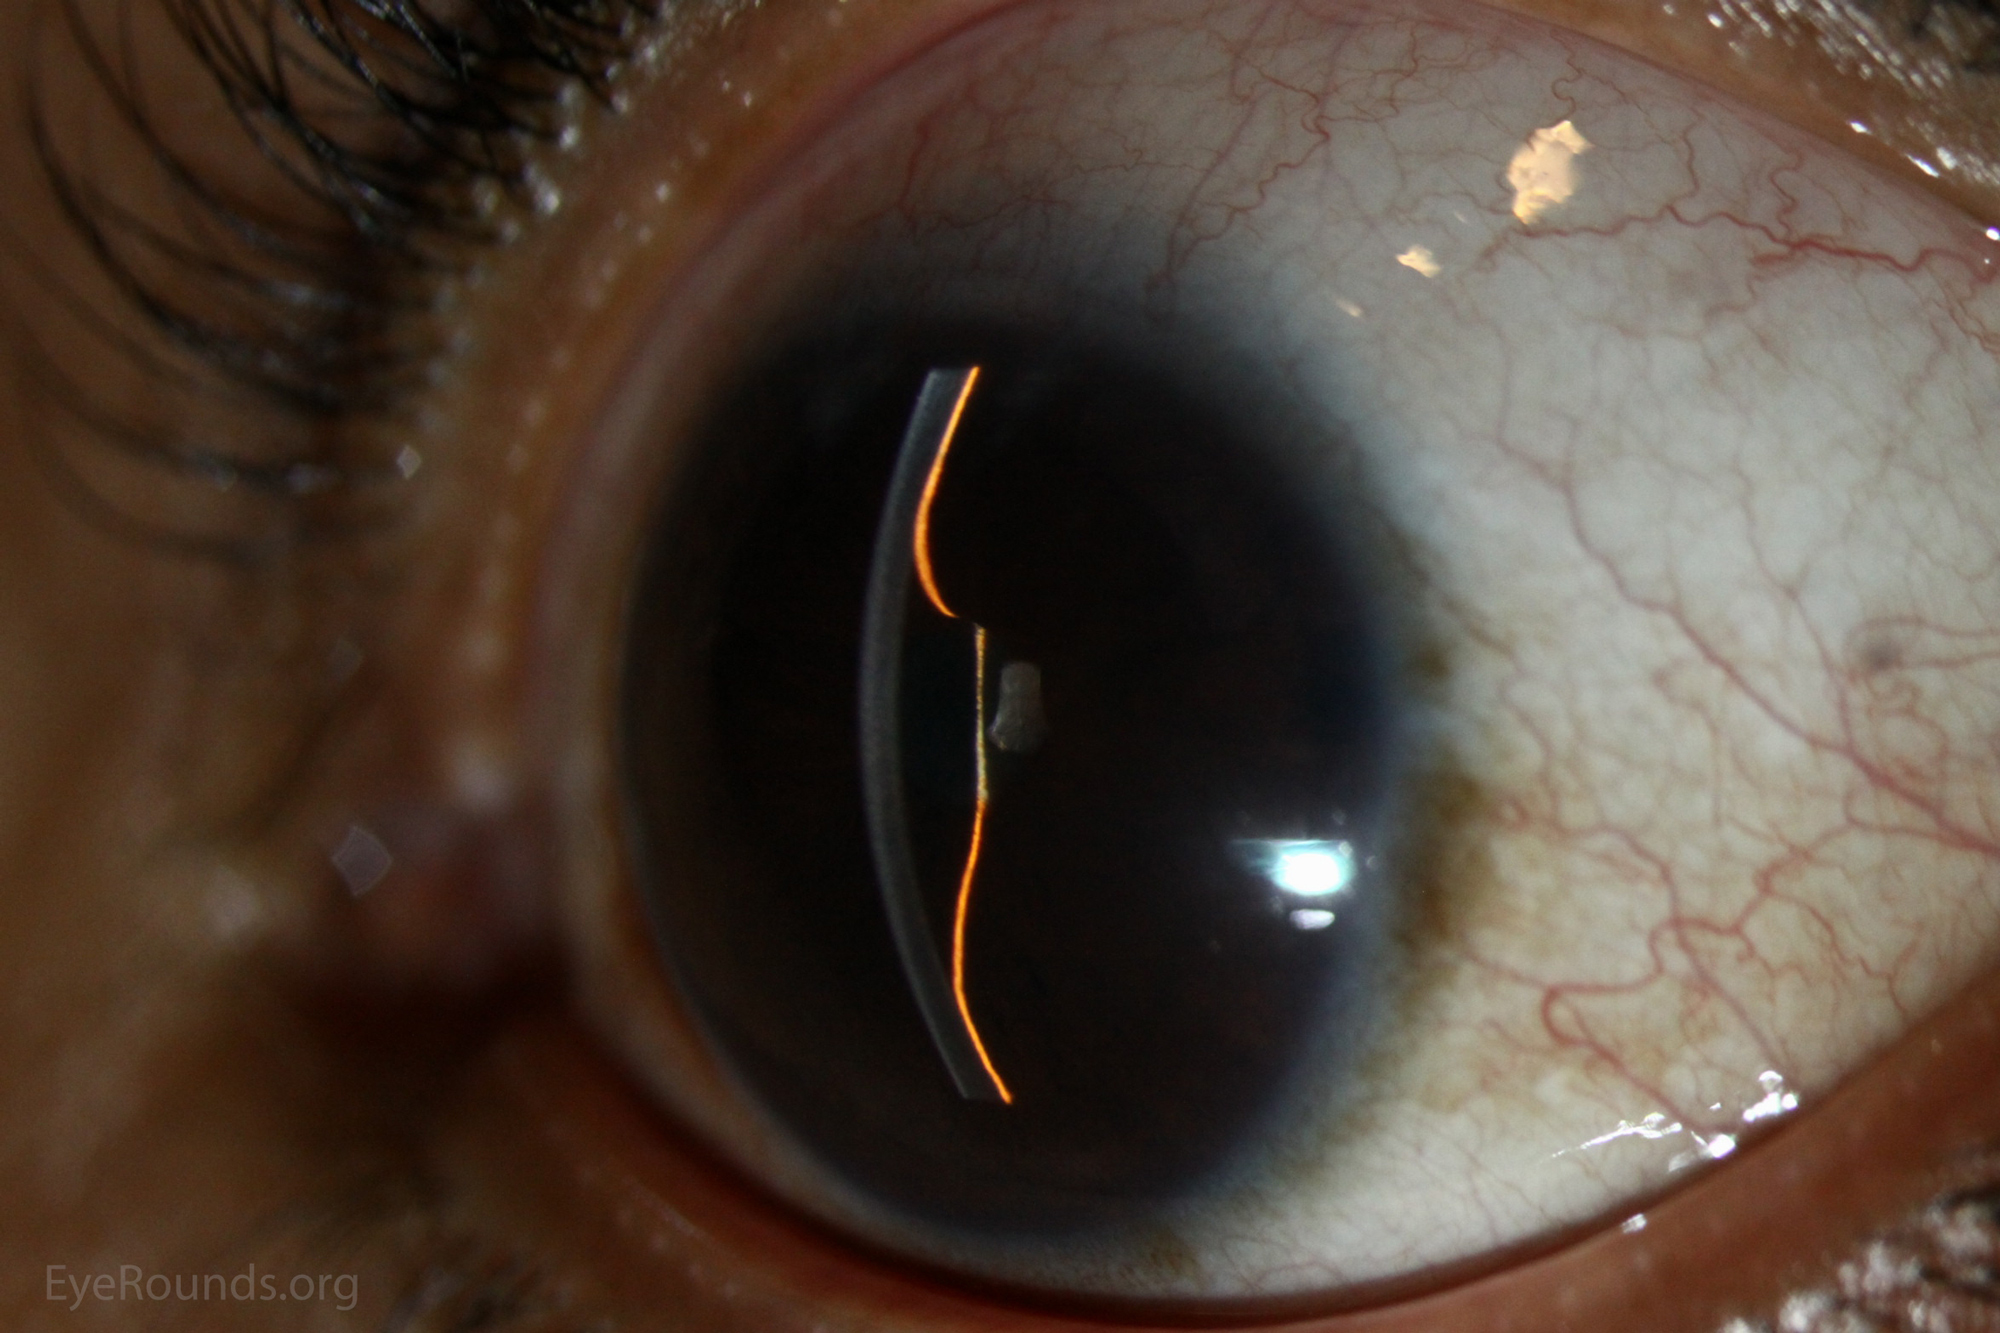 slit lamp iris bombe developed in this patient with chronic iridocyclitis and central posterior synechiae.